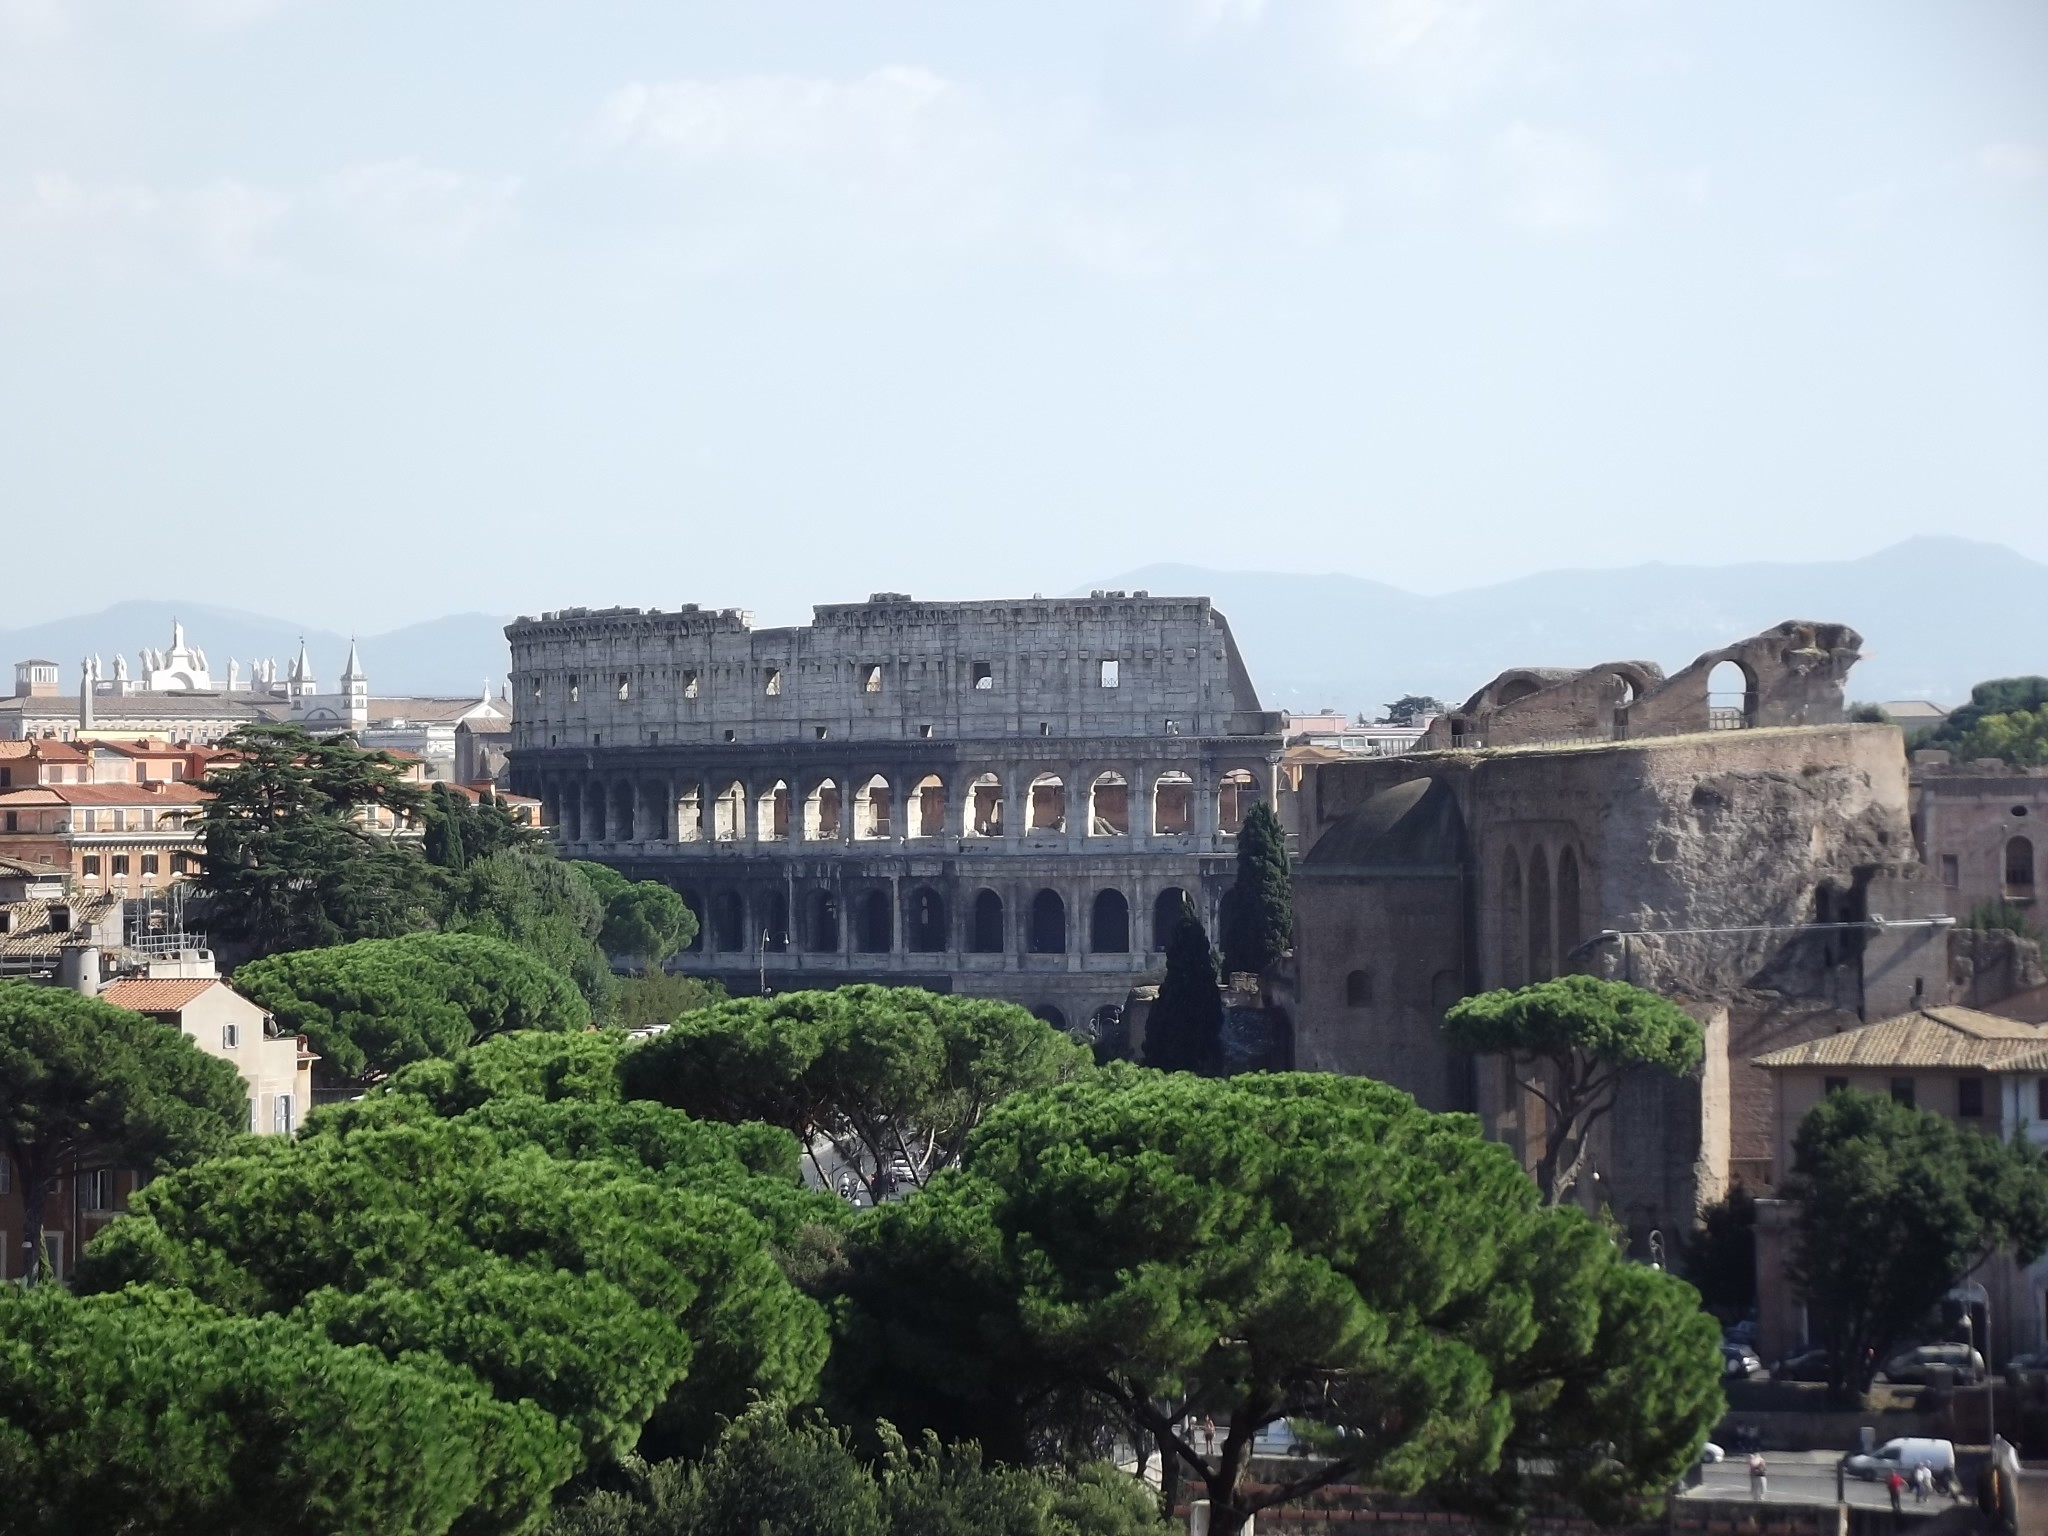 General 2048x1536 Rome Italy Colosseum city trees ruins